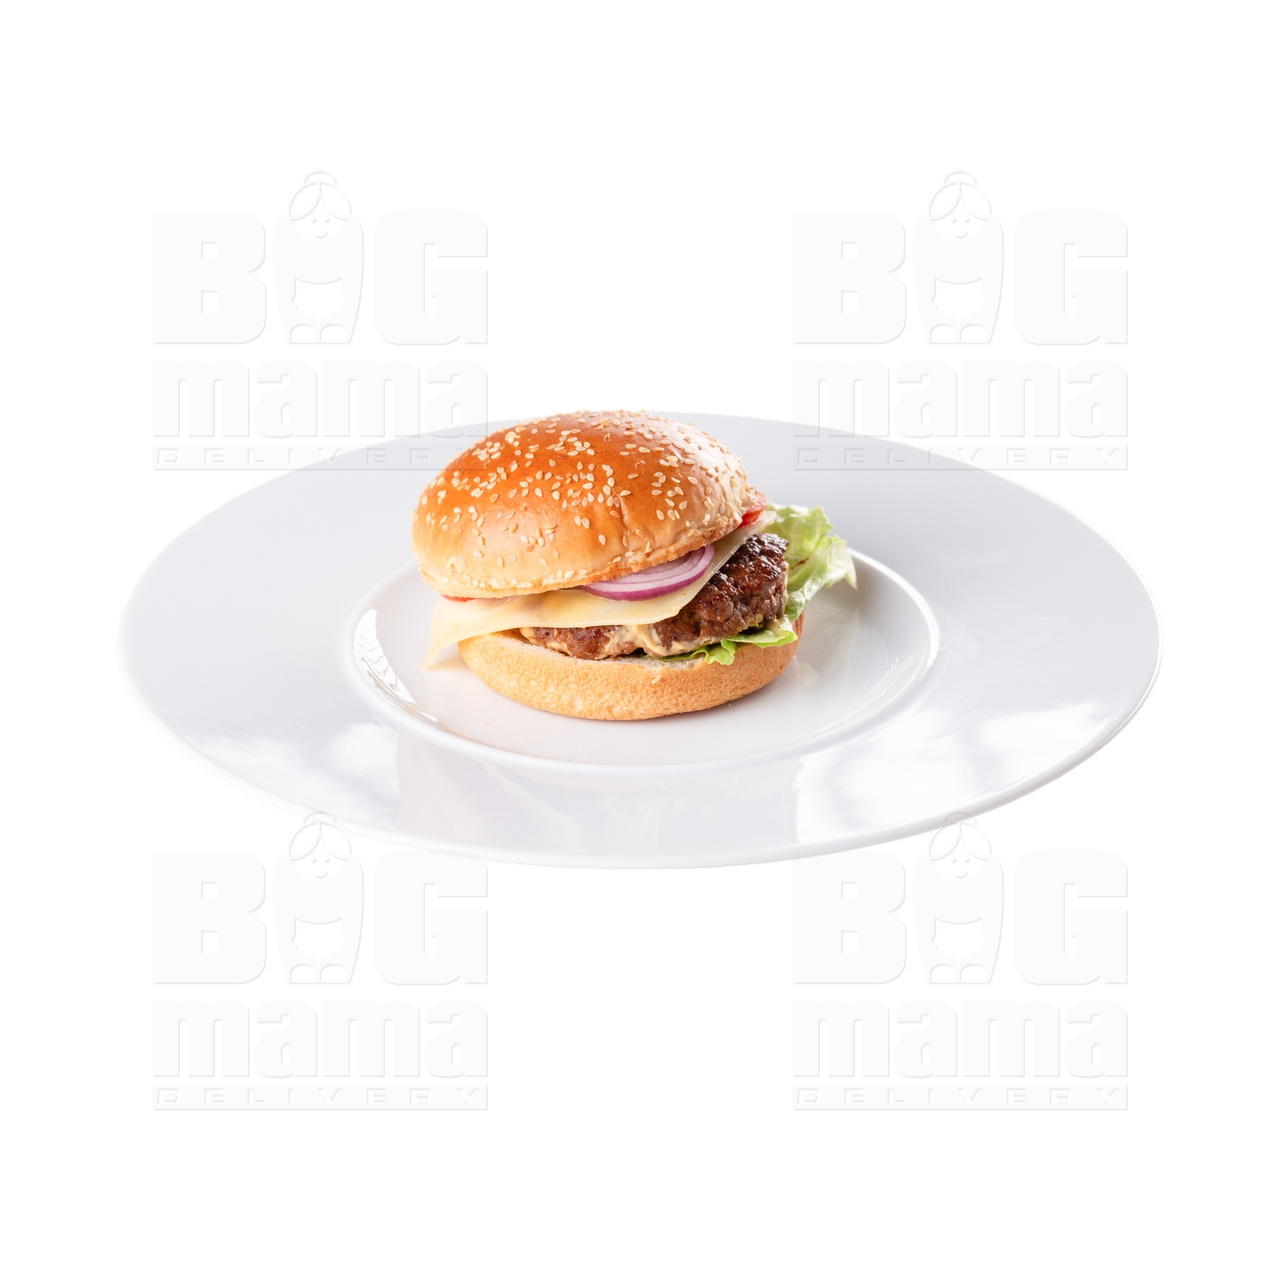 Product #267 image - Burger with mici